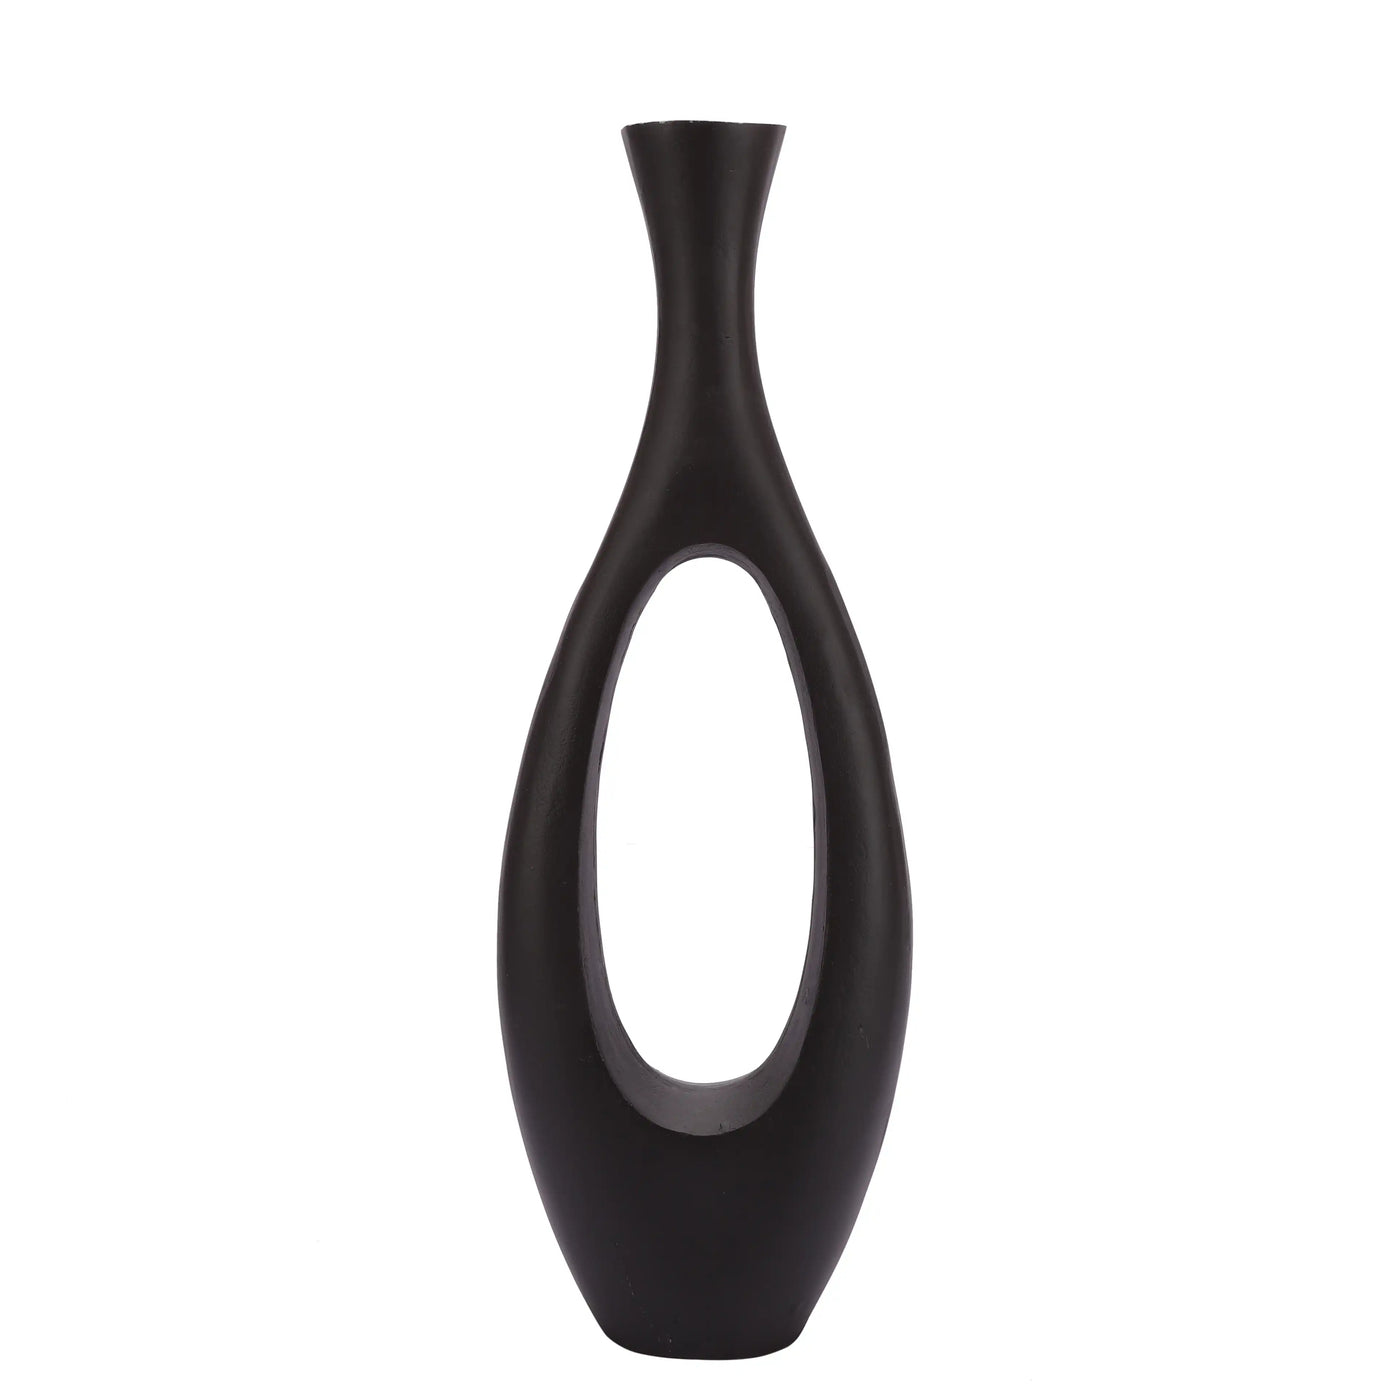 Oblong Vase in Raw Black Finish Small Size 61-378-55-3